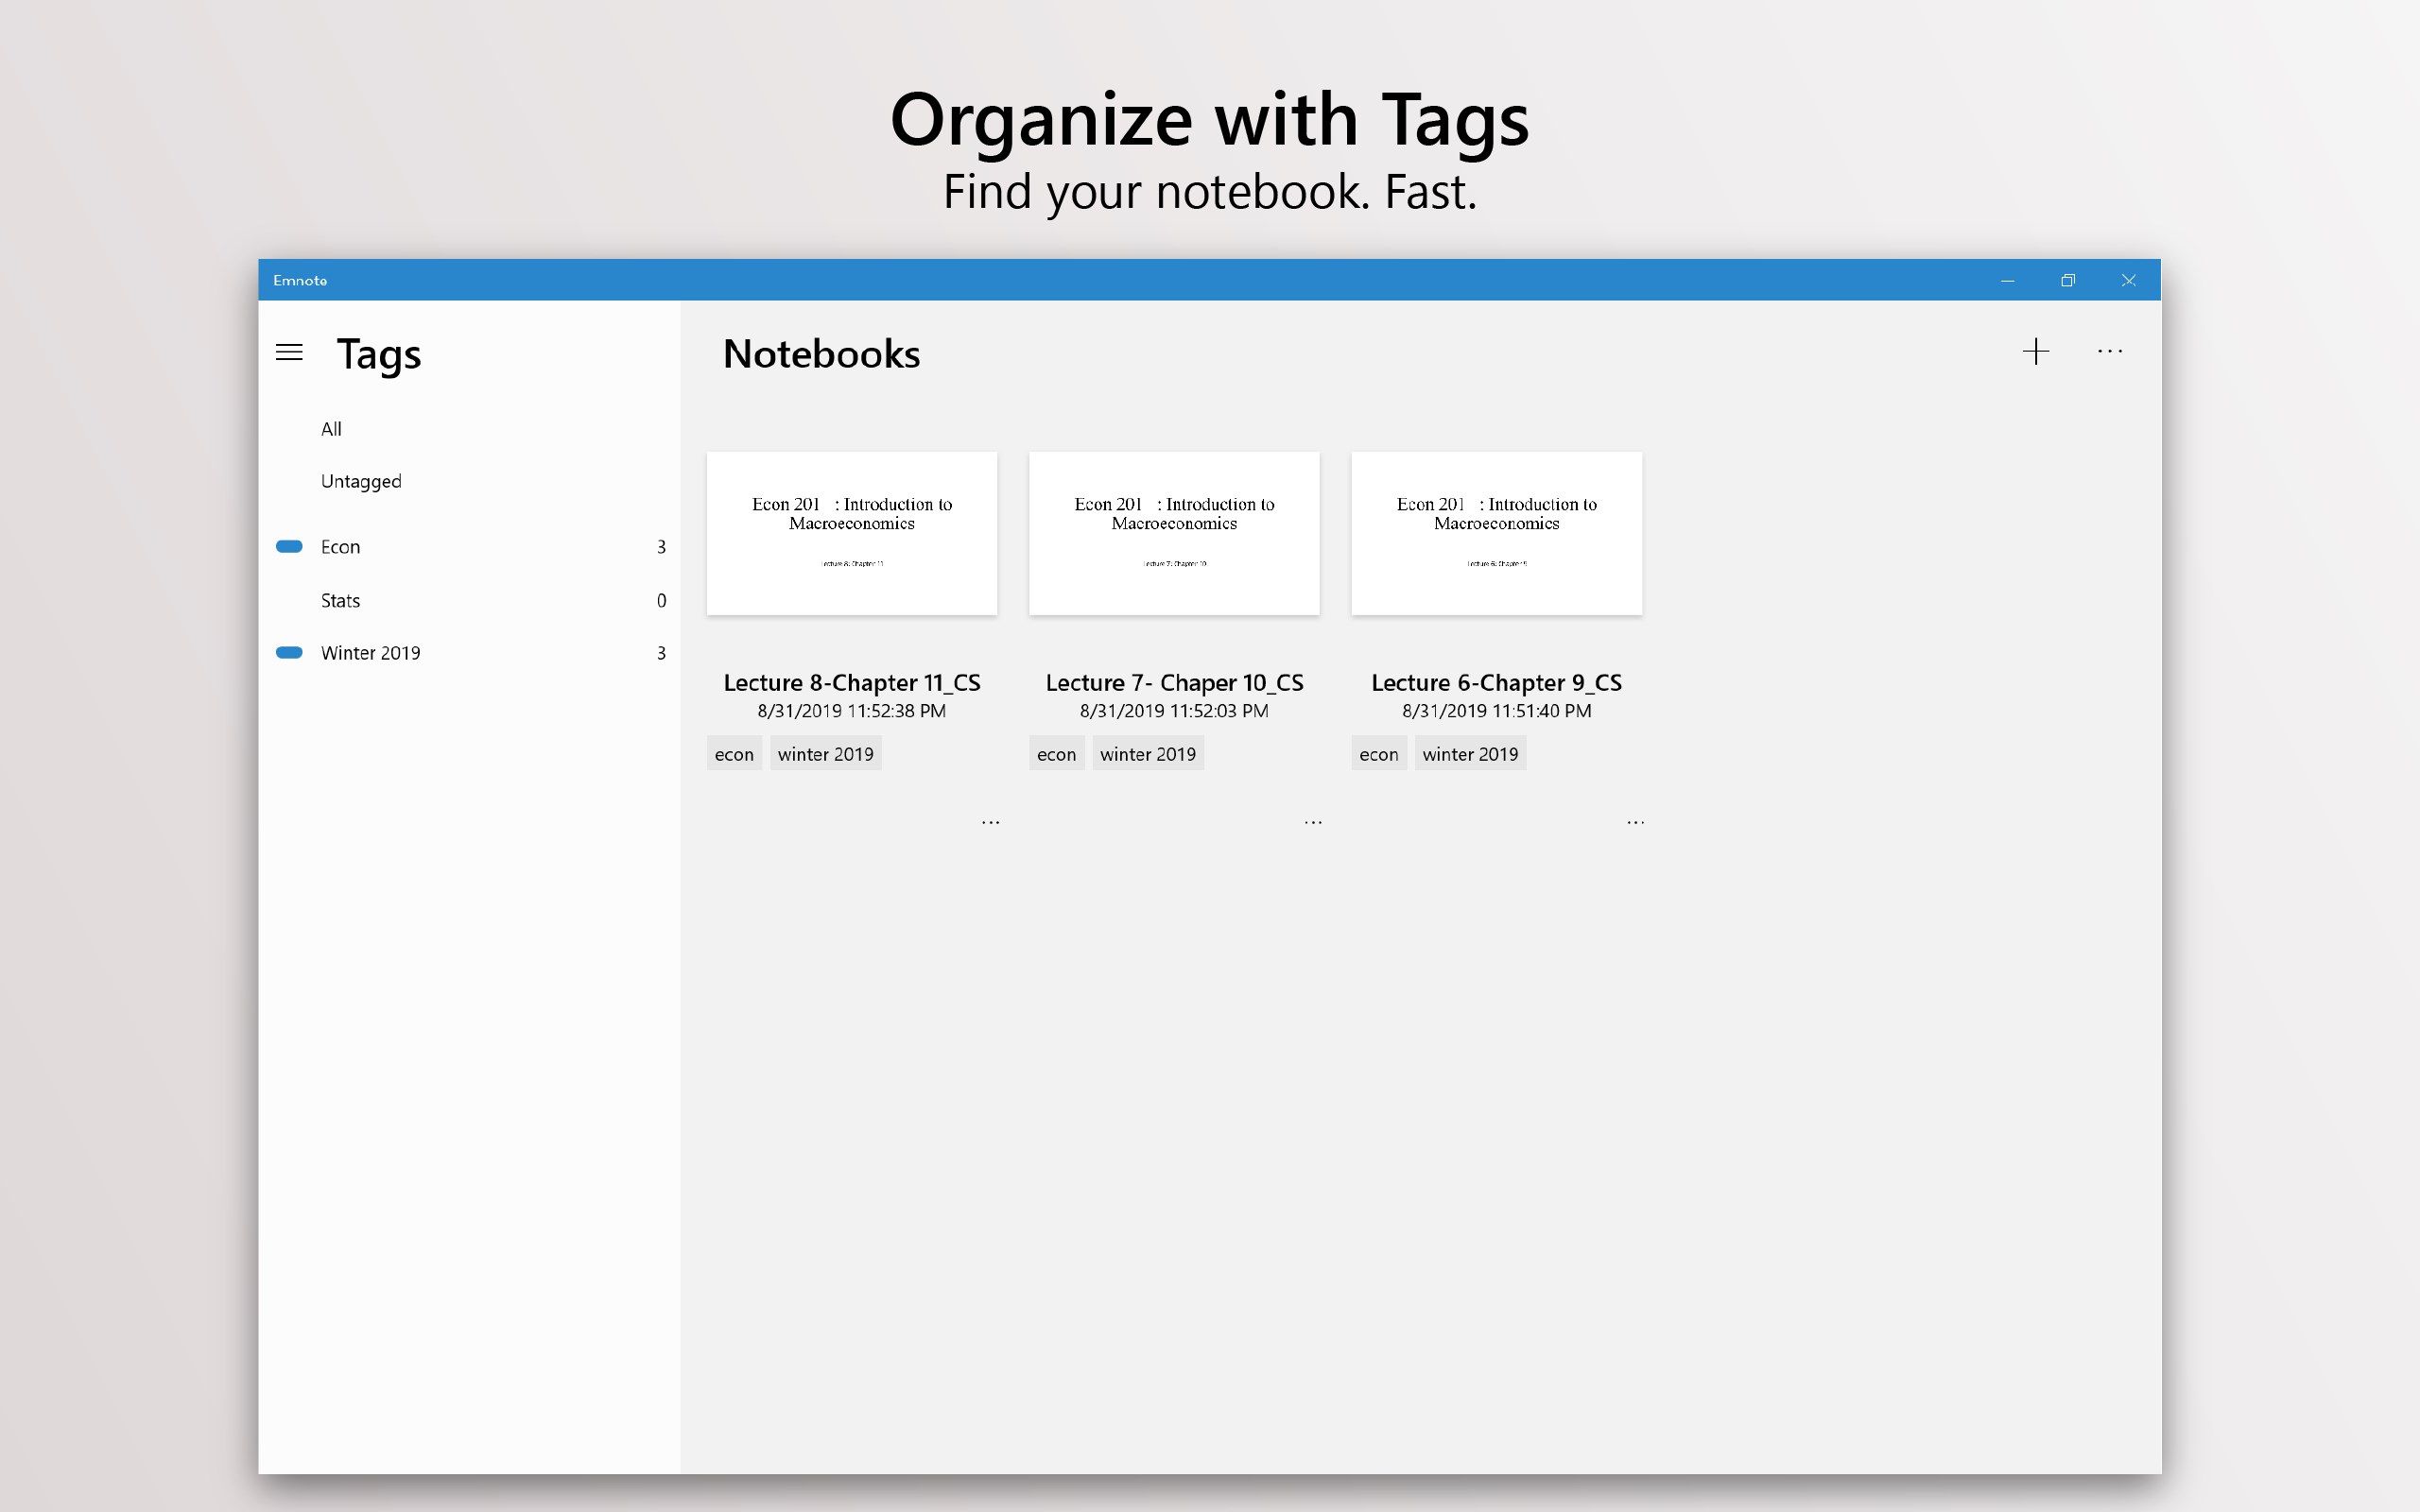 Organize and filter notebooks with tags